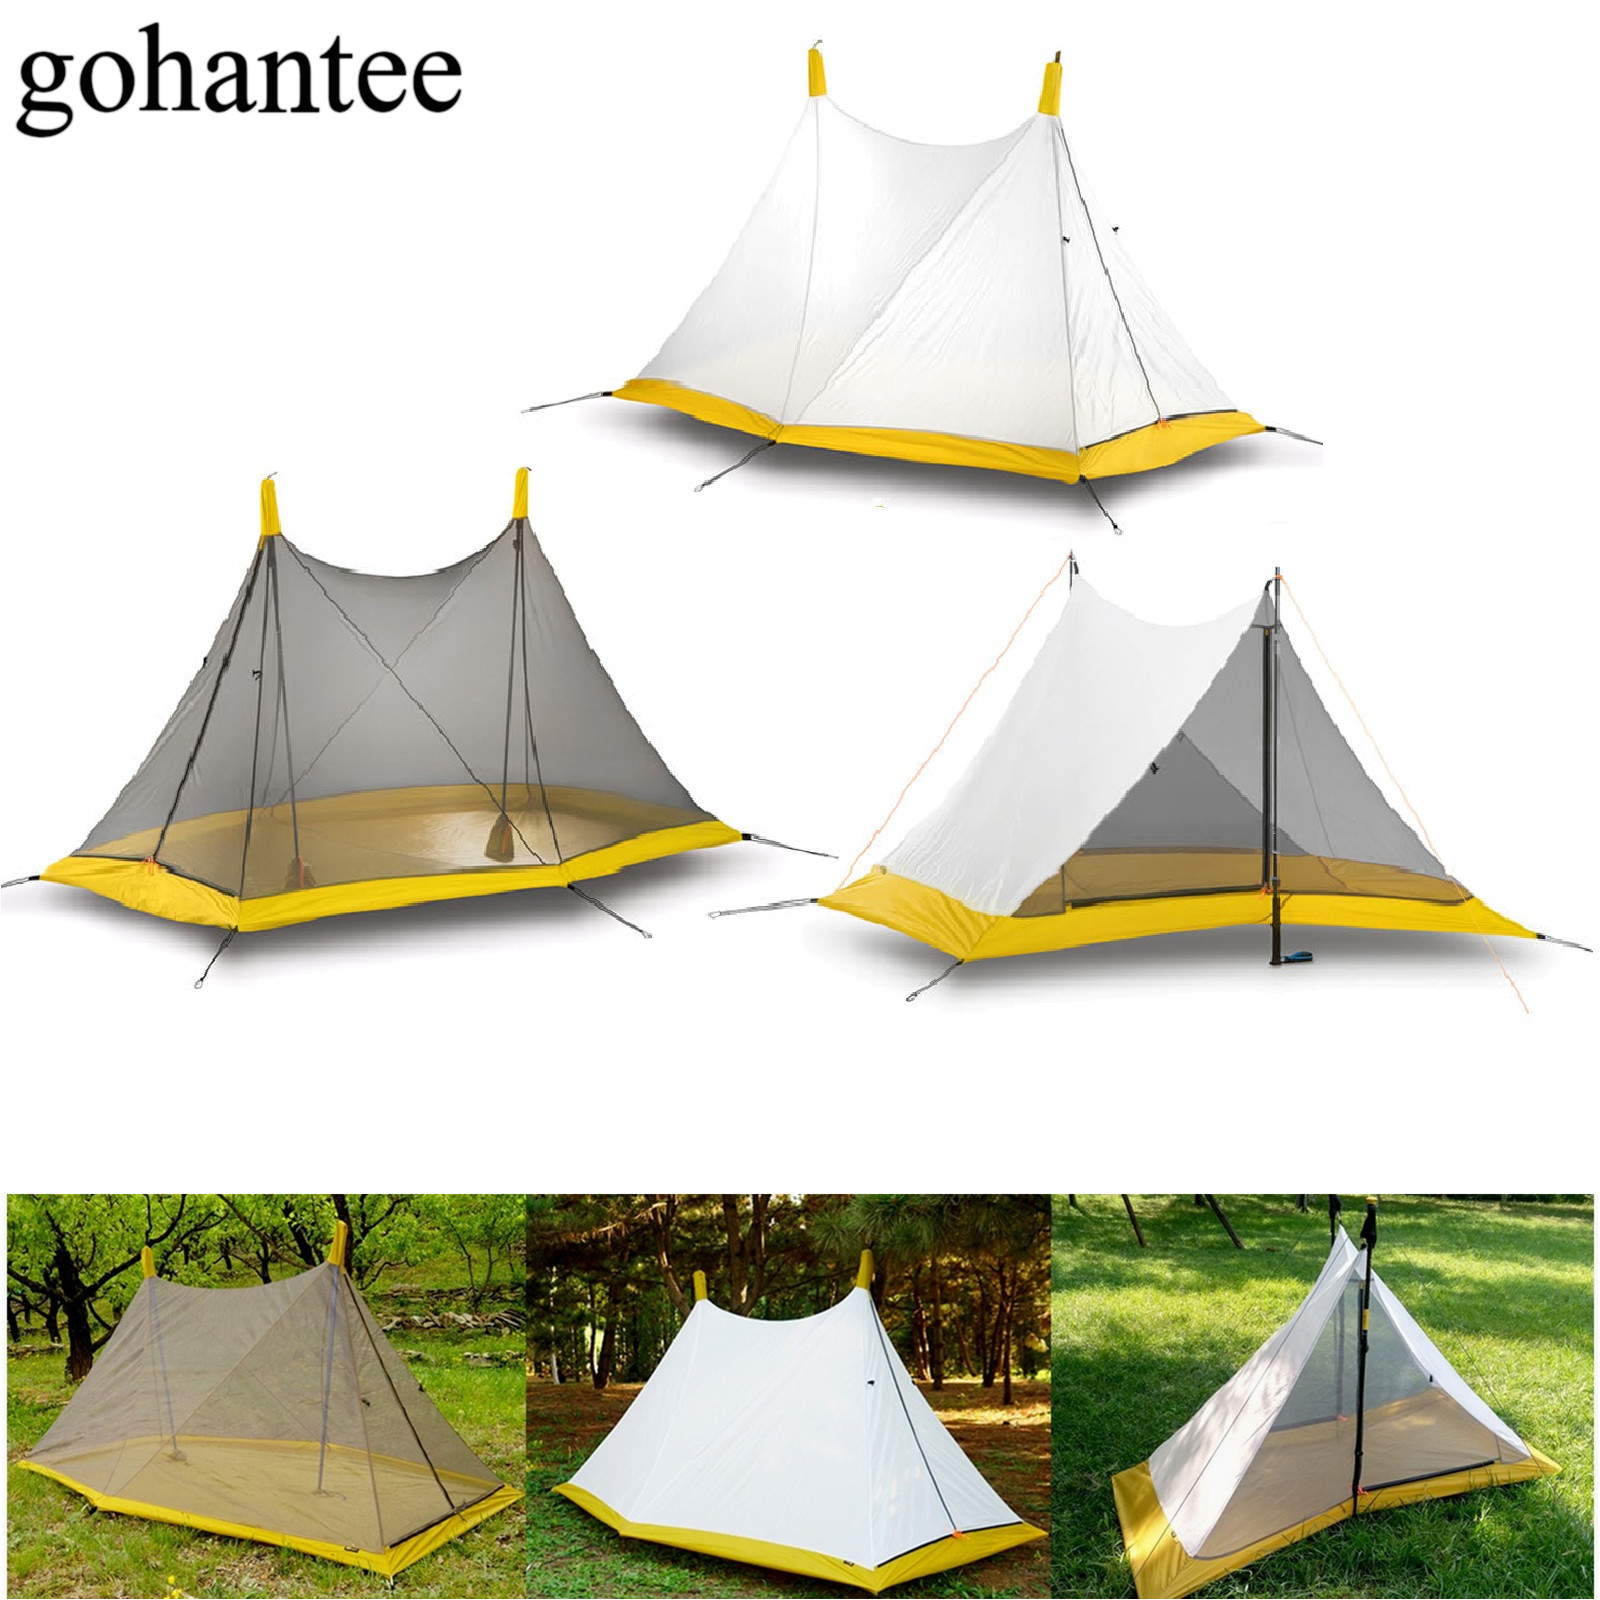 Goat tent camping set up Ultralight Camping Tent 1-2 Person Outdoor 40D Nylon Silicon Coated Rodless Pyramid Tent Summer Breathable 3-4 Season Inner Tent tent camping near crystal river fl